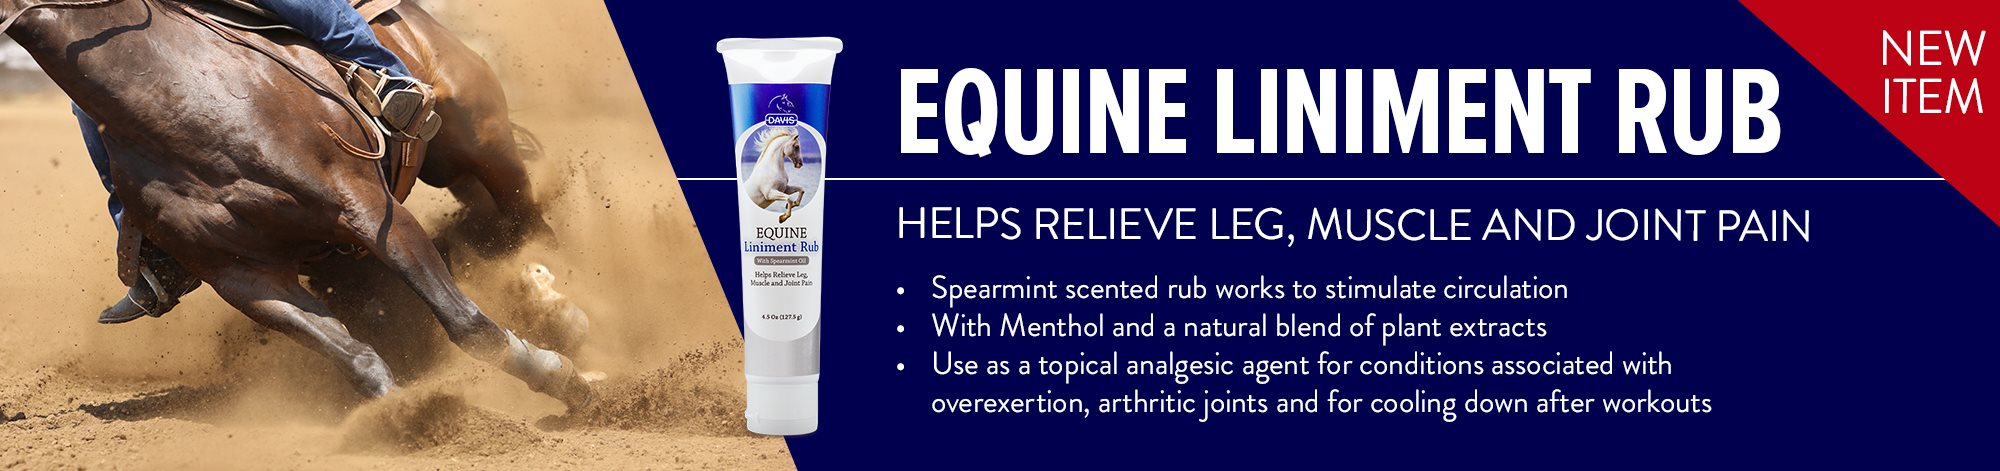 Equine Liniment Rub helps relieve leg, muscle, and joint pain